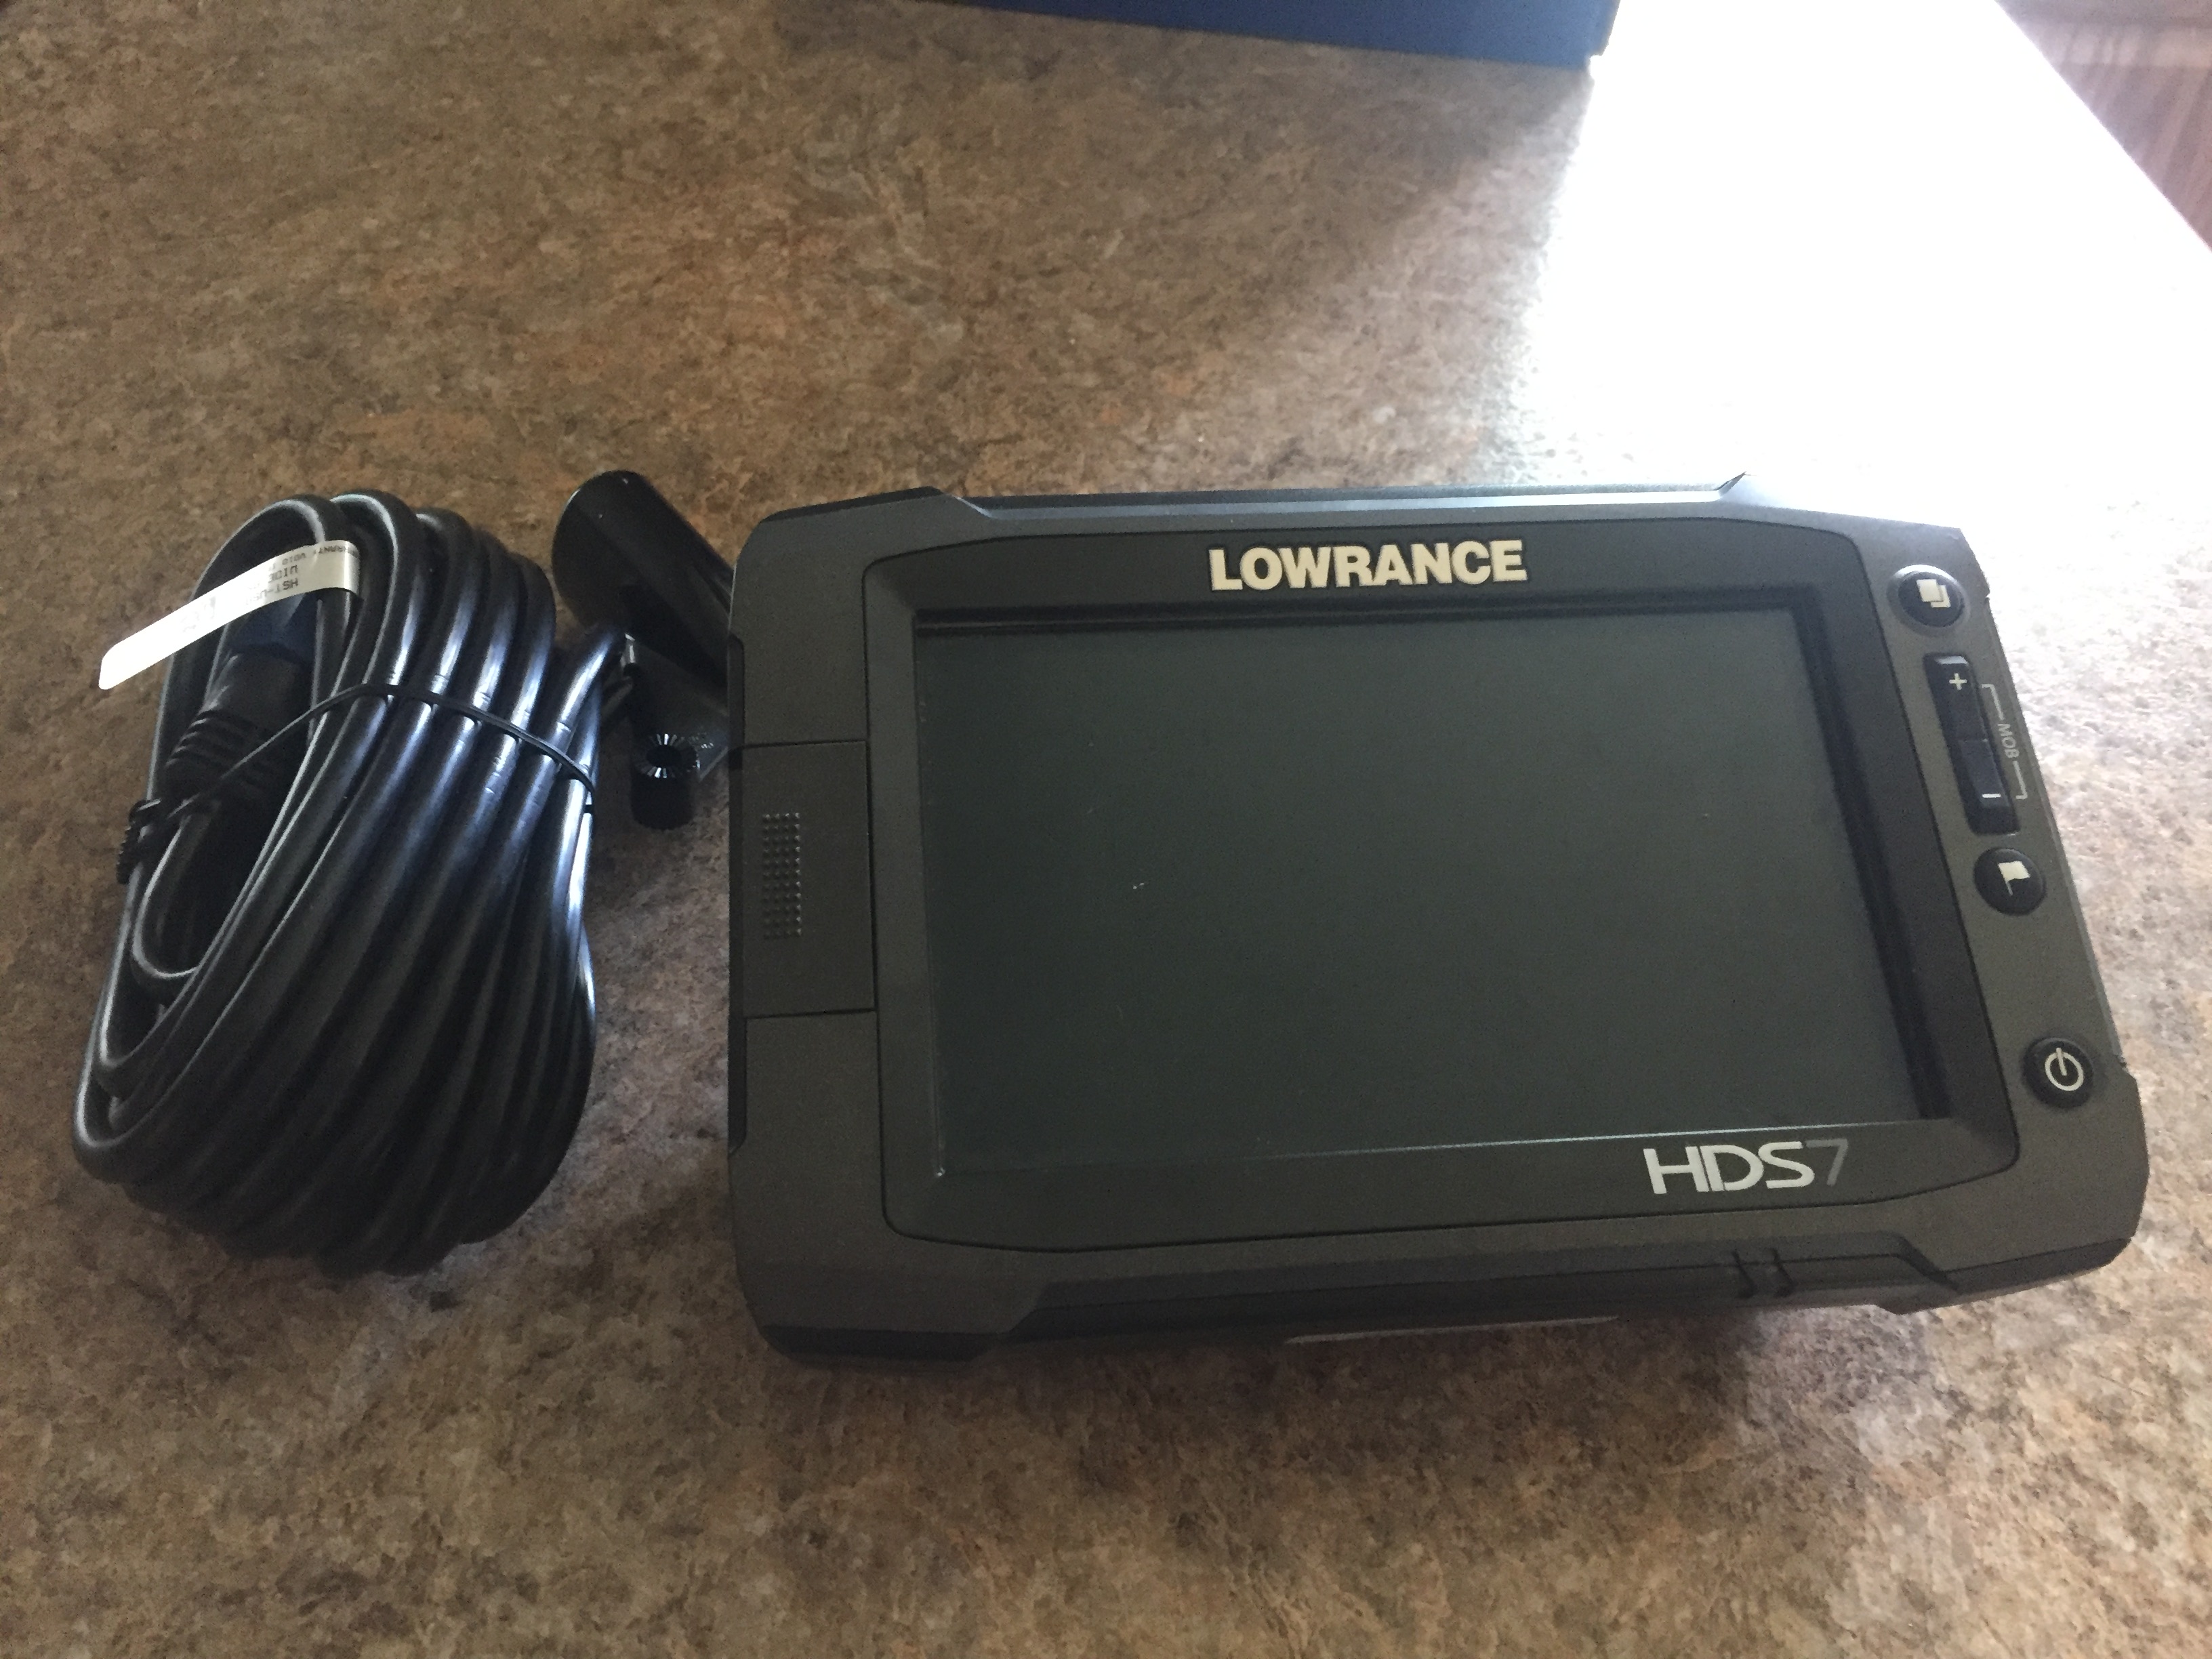 Lowrance hds-7 gen2 touch - Classified Ads | In-Depth Outdoors